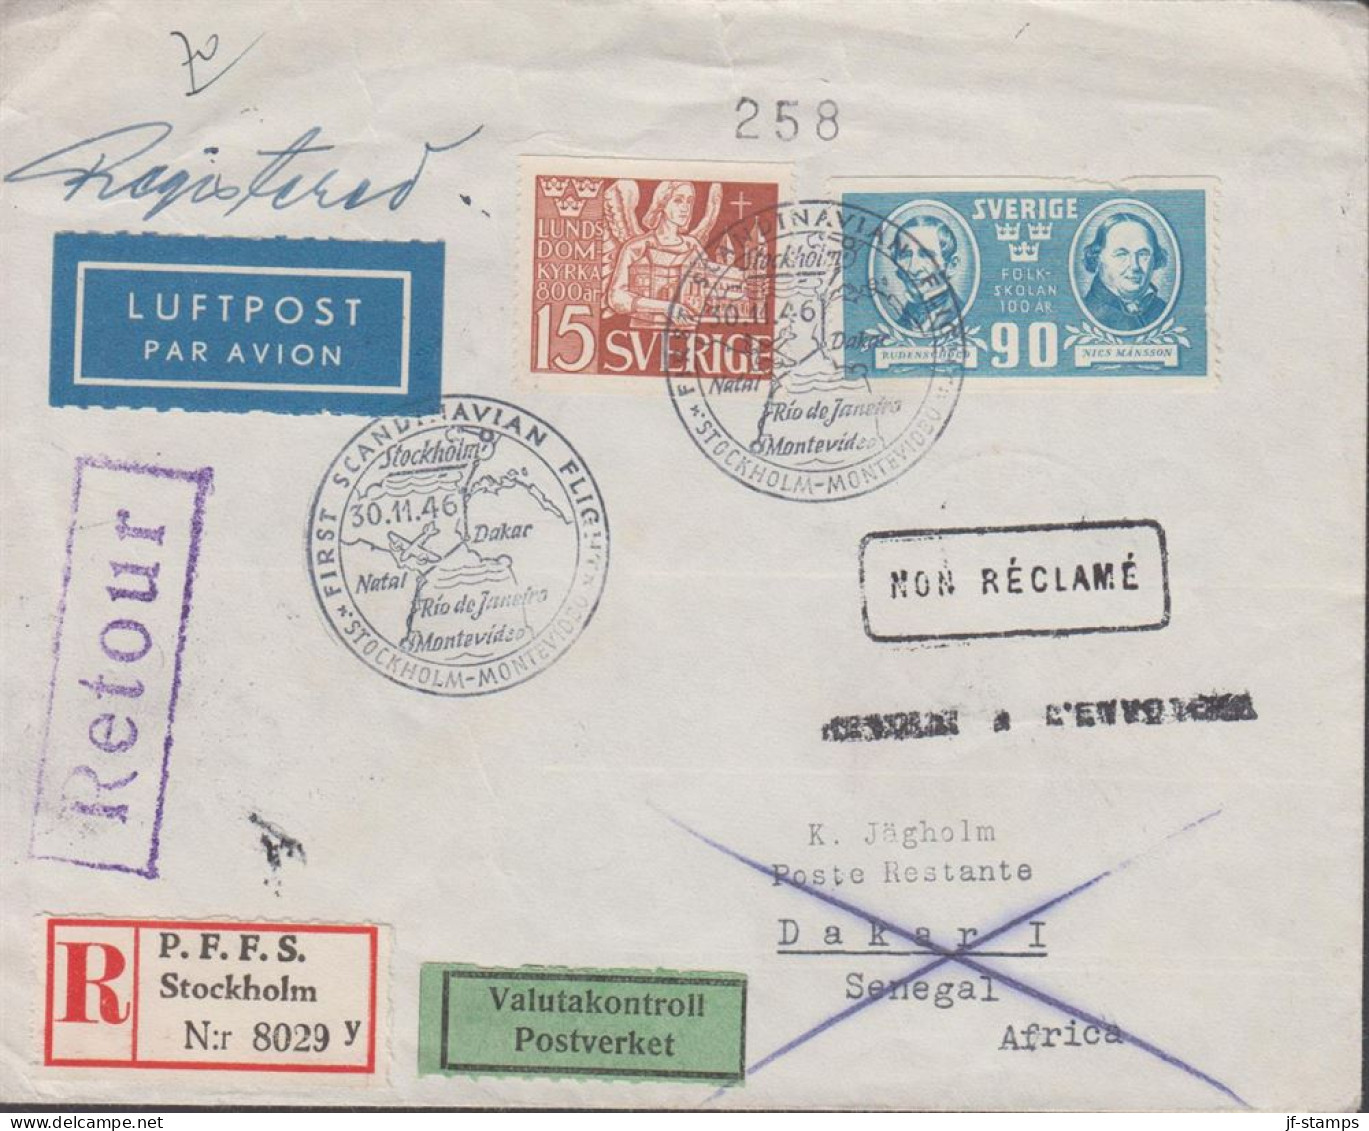 1946. SVERIGE. Fine Registered LUFTPOST Cover To Dakar, Senegal With 15 ÖRE LUNDS DOMKYRKA A... (Michel 294+) - JF444805 - Covers & Documents